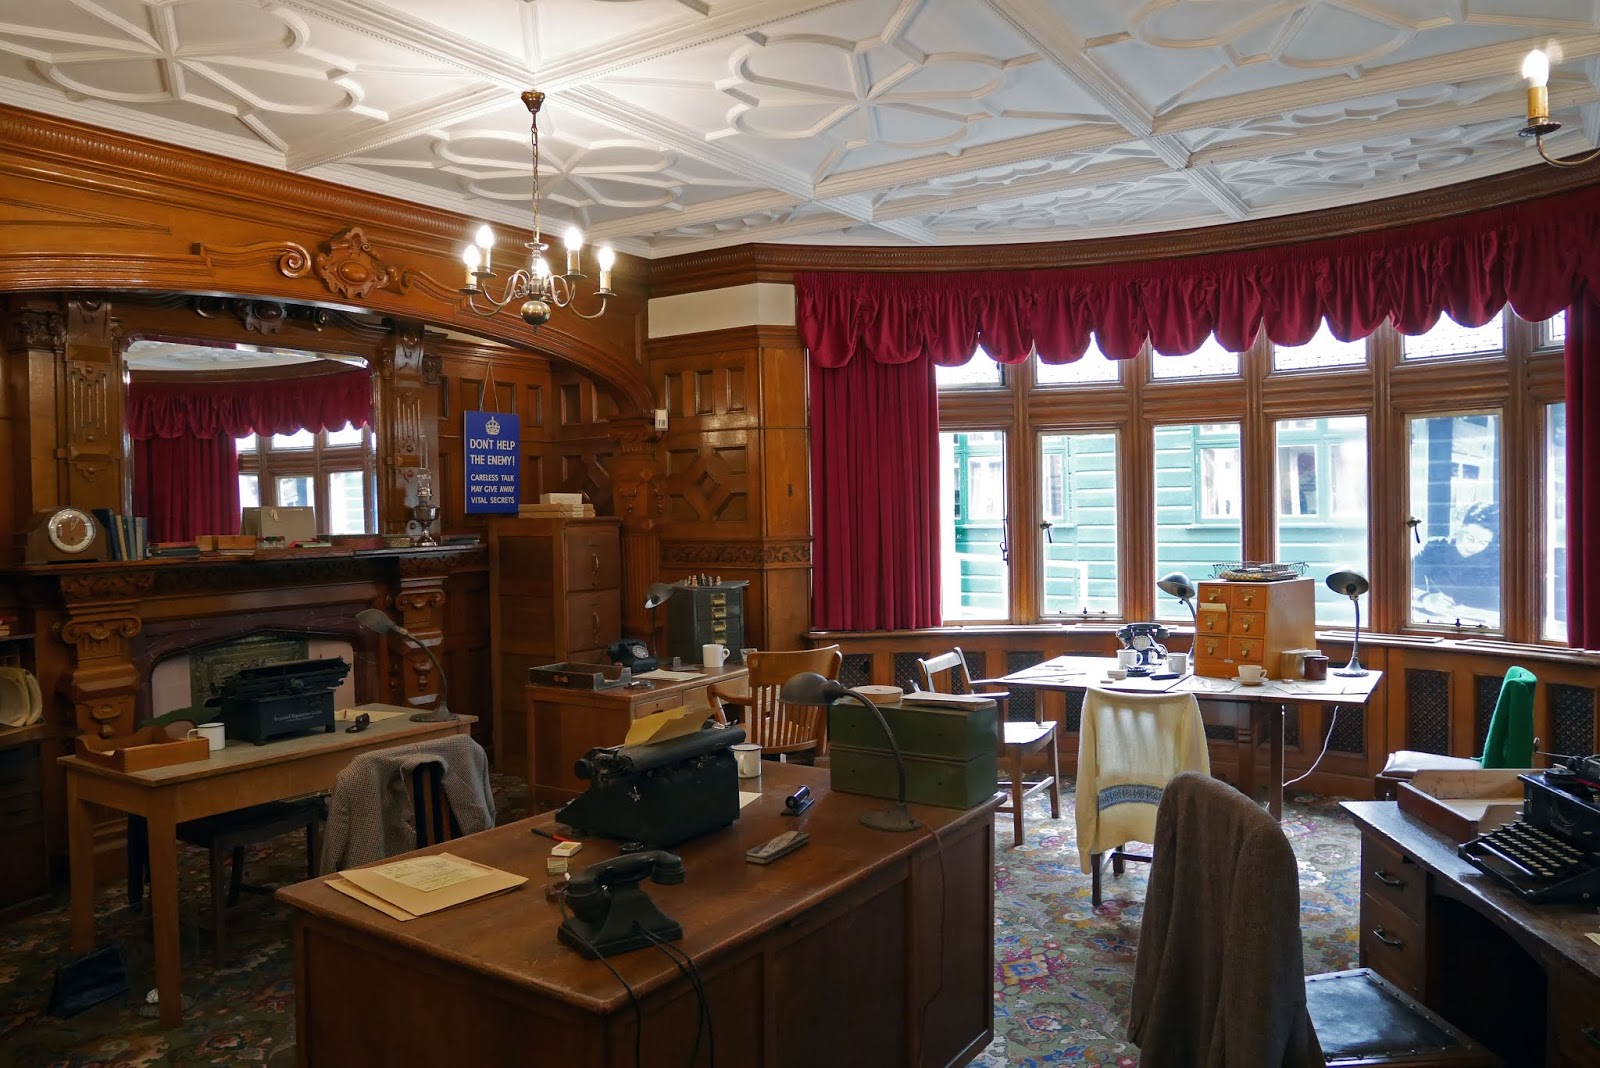 The Head of the Government Code and Cypher School’s office at Bletchley Park